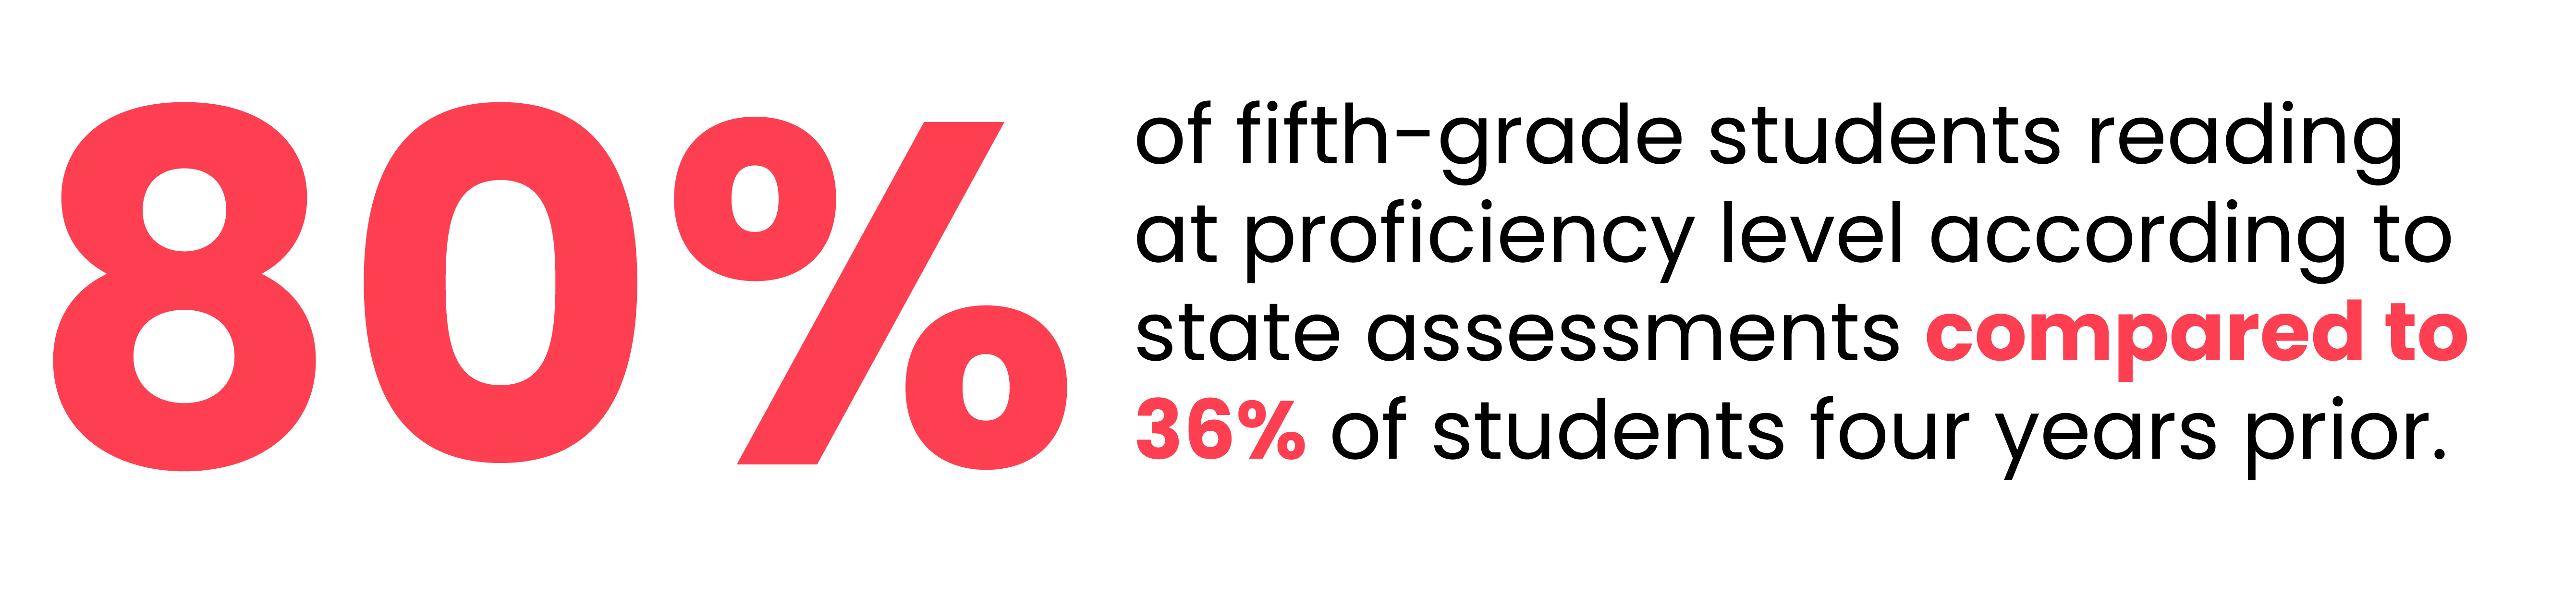 80% of fifth-grade students reading at proficiency level according to state assessments compared to 36% of students four years prior..